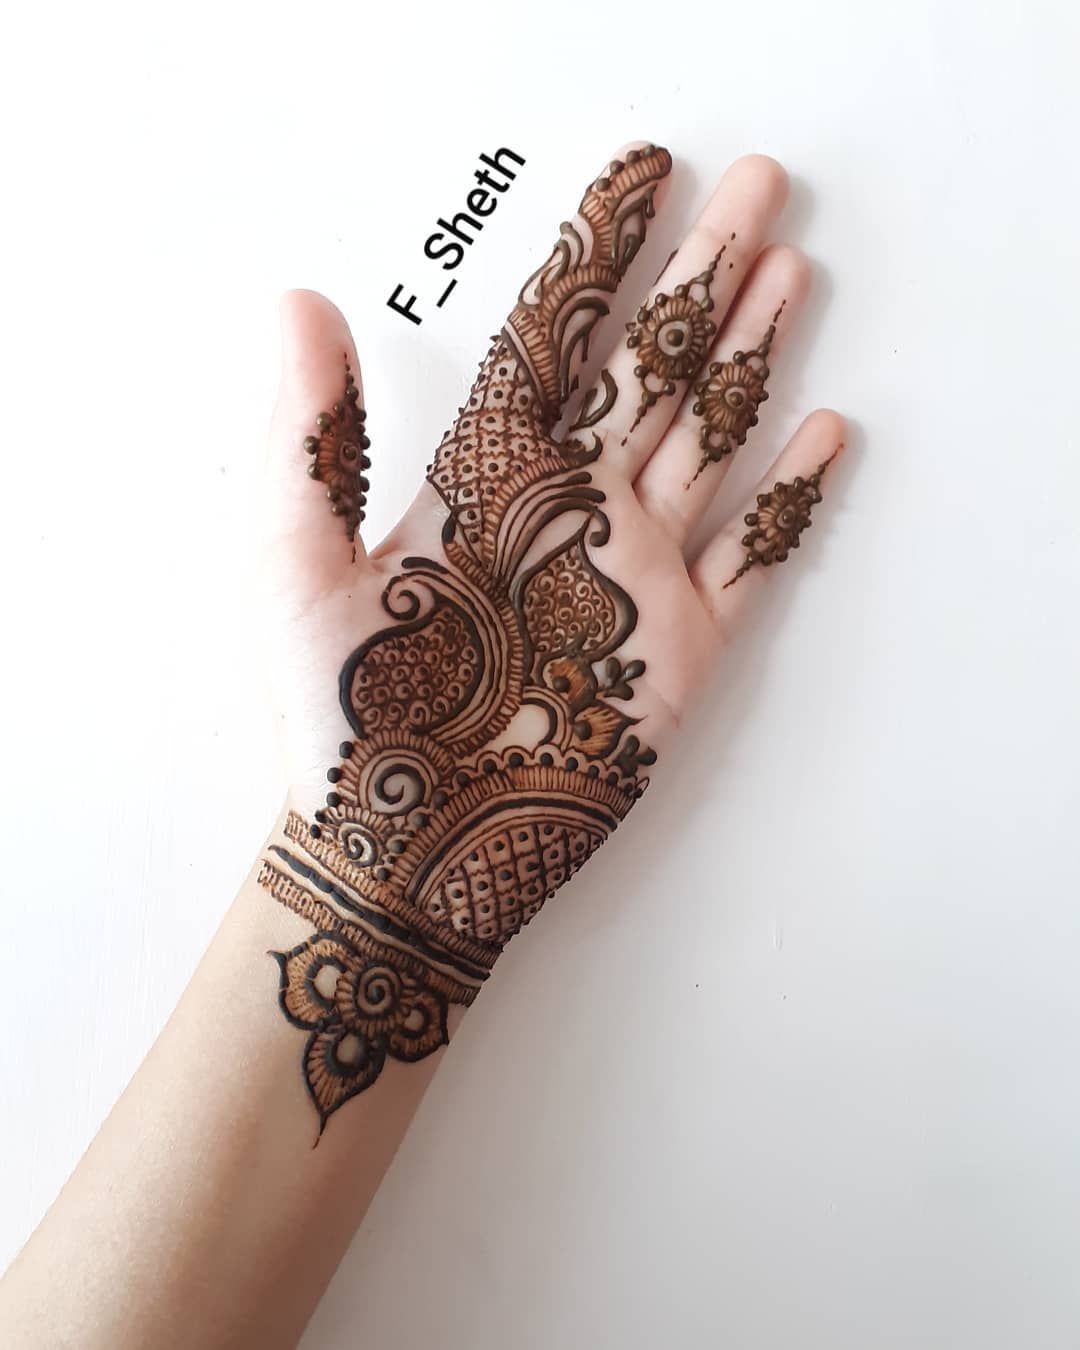 New Latest Arabic Mehndi Design For Front Hand K4 Fashion Henna Designs Hand Arabic Design Designs Fashion Front 13 September 21